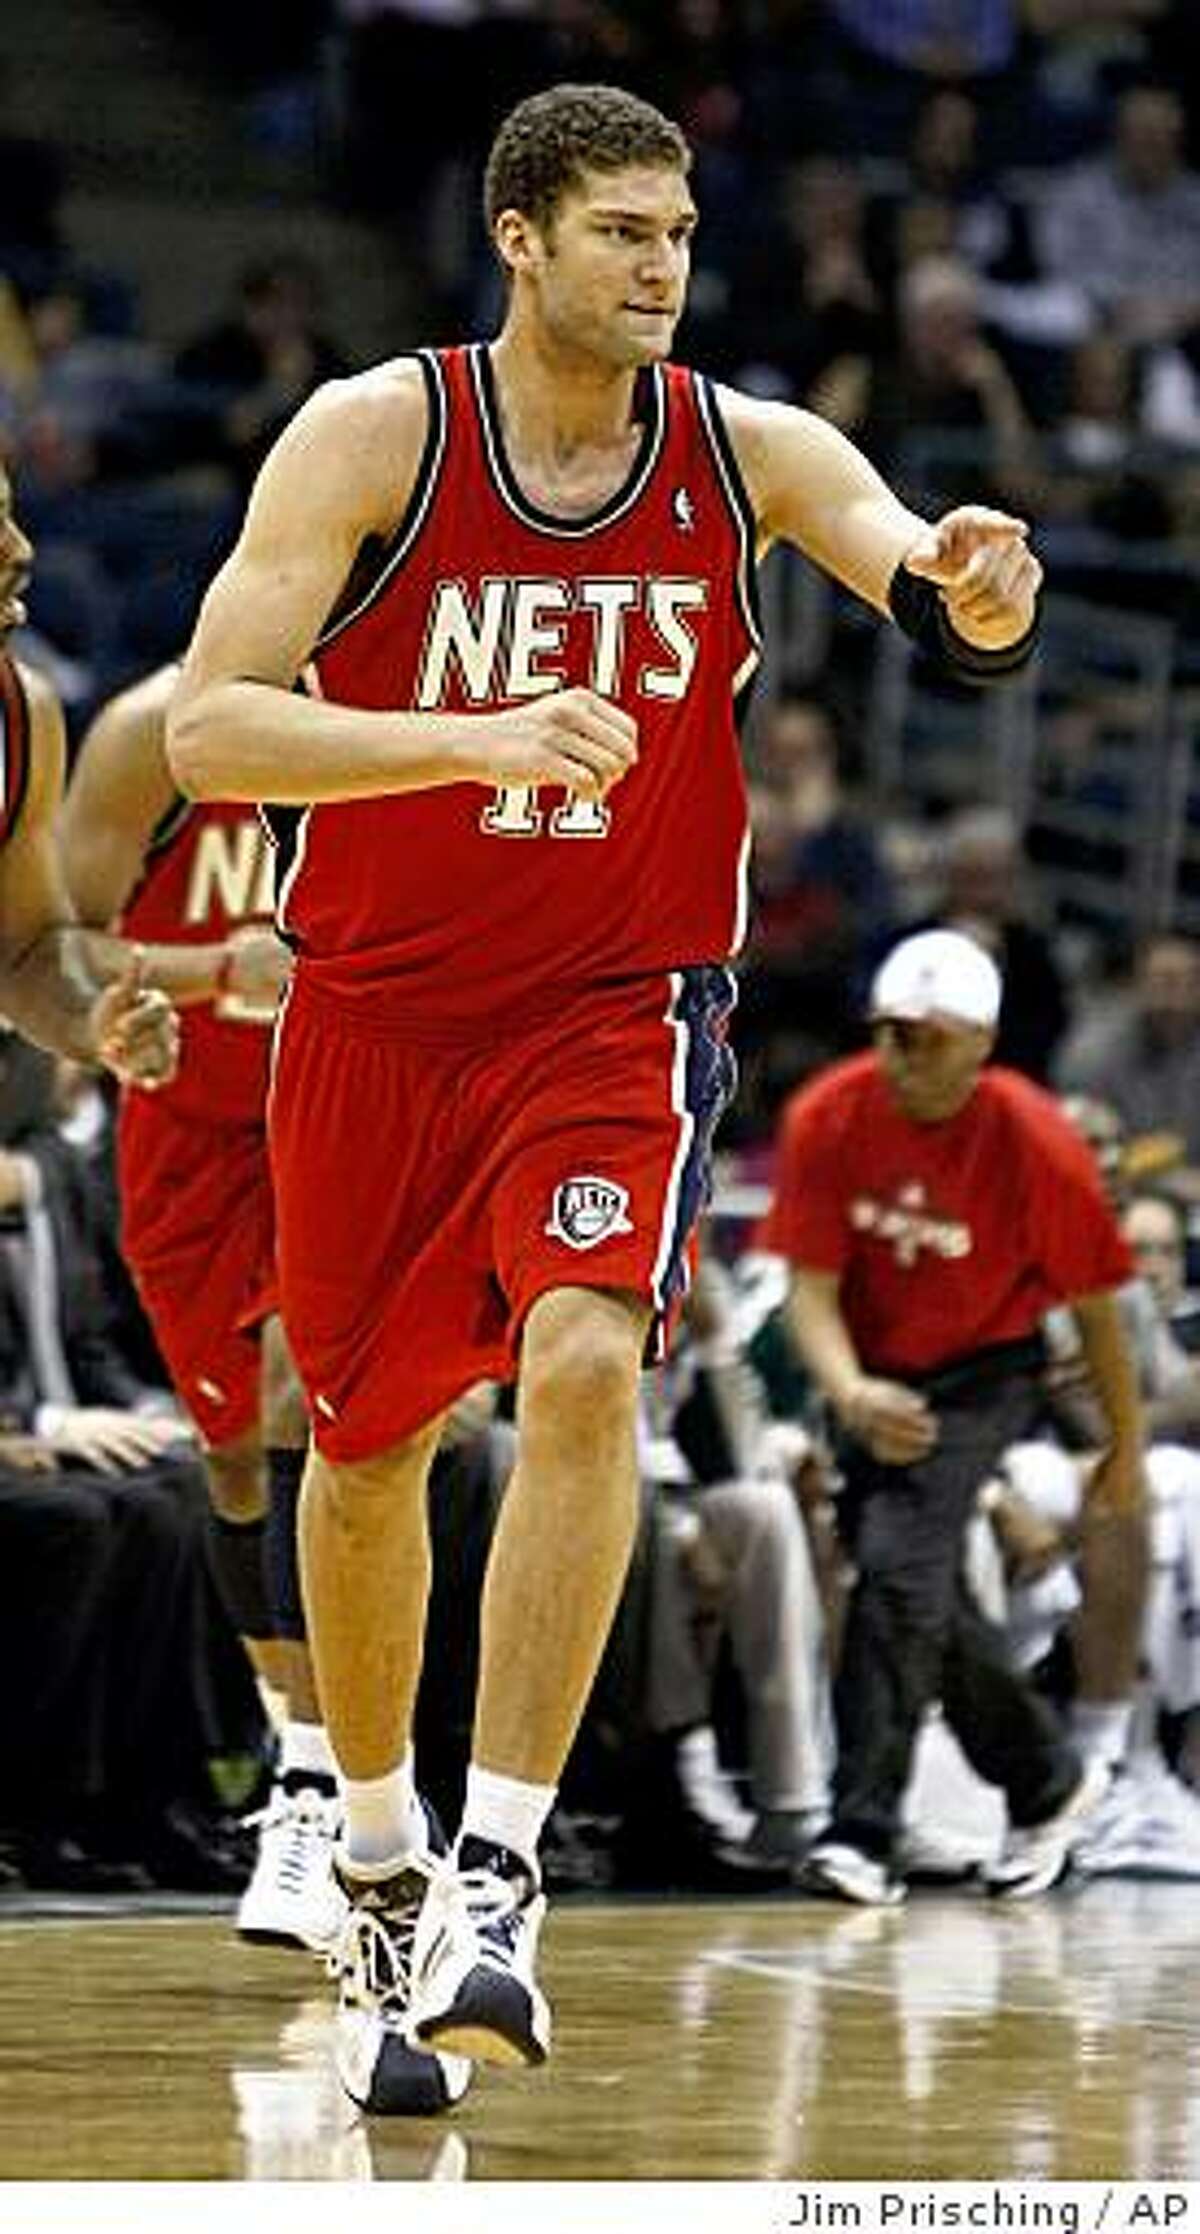 New Jersey Nets' Brook Lopez reacts after scoring a basket during the second half of an NBA basketball game Tuesday, March 3, 2009, in Milwaukee. The Nets beat the Milwaukee Bucks 99-95. (AP Photo/Jim Prisching)